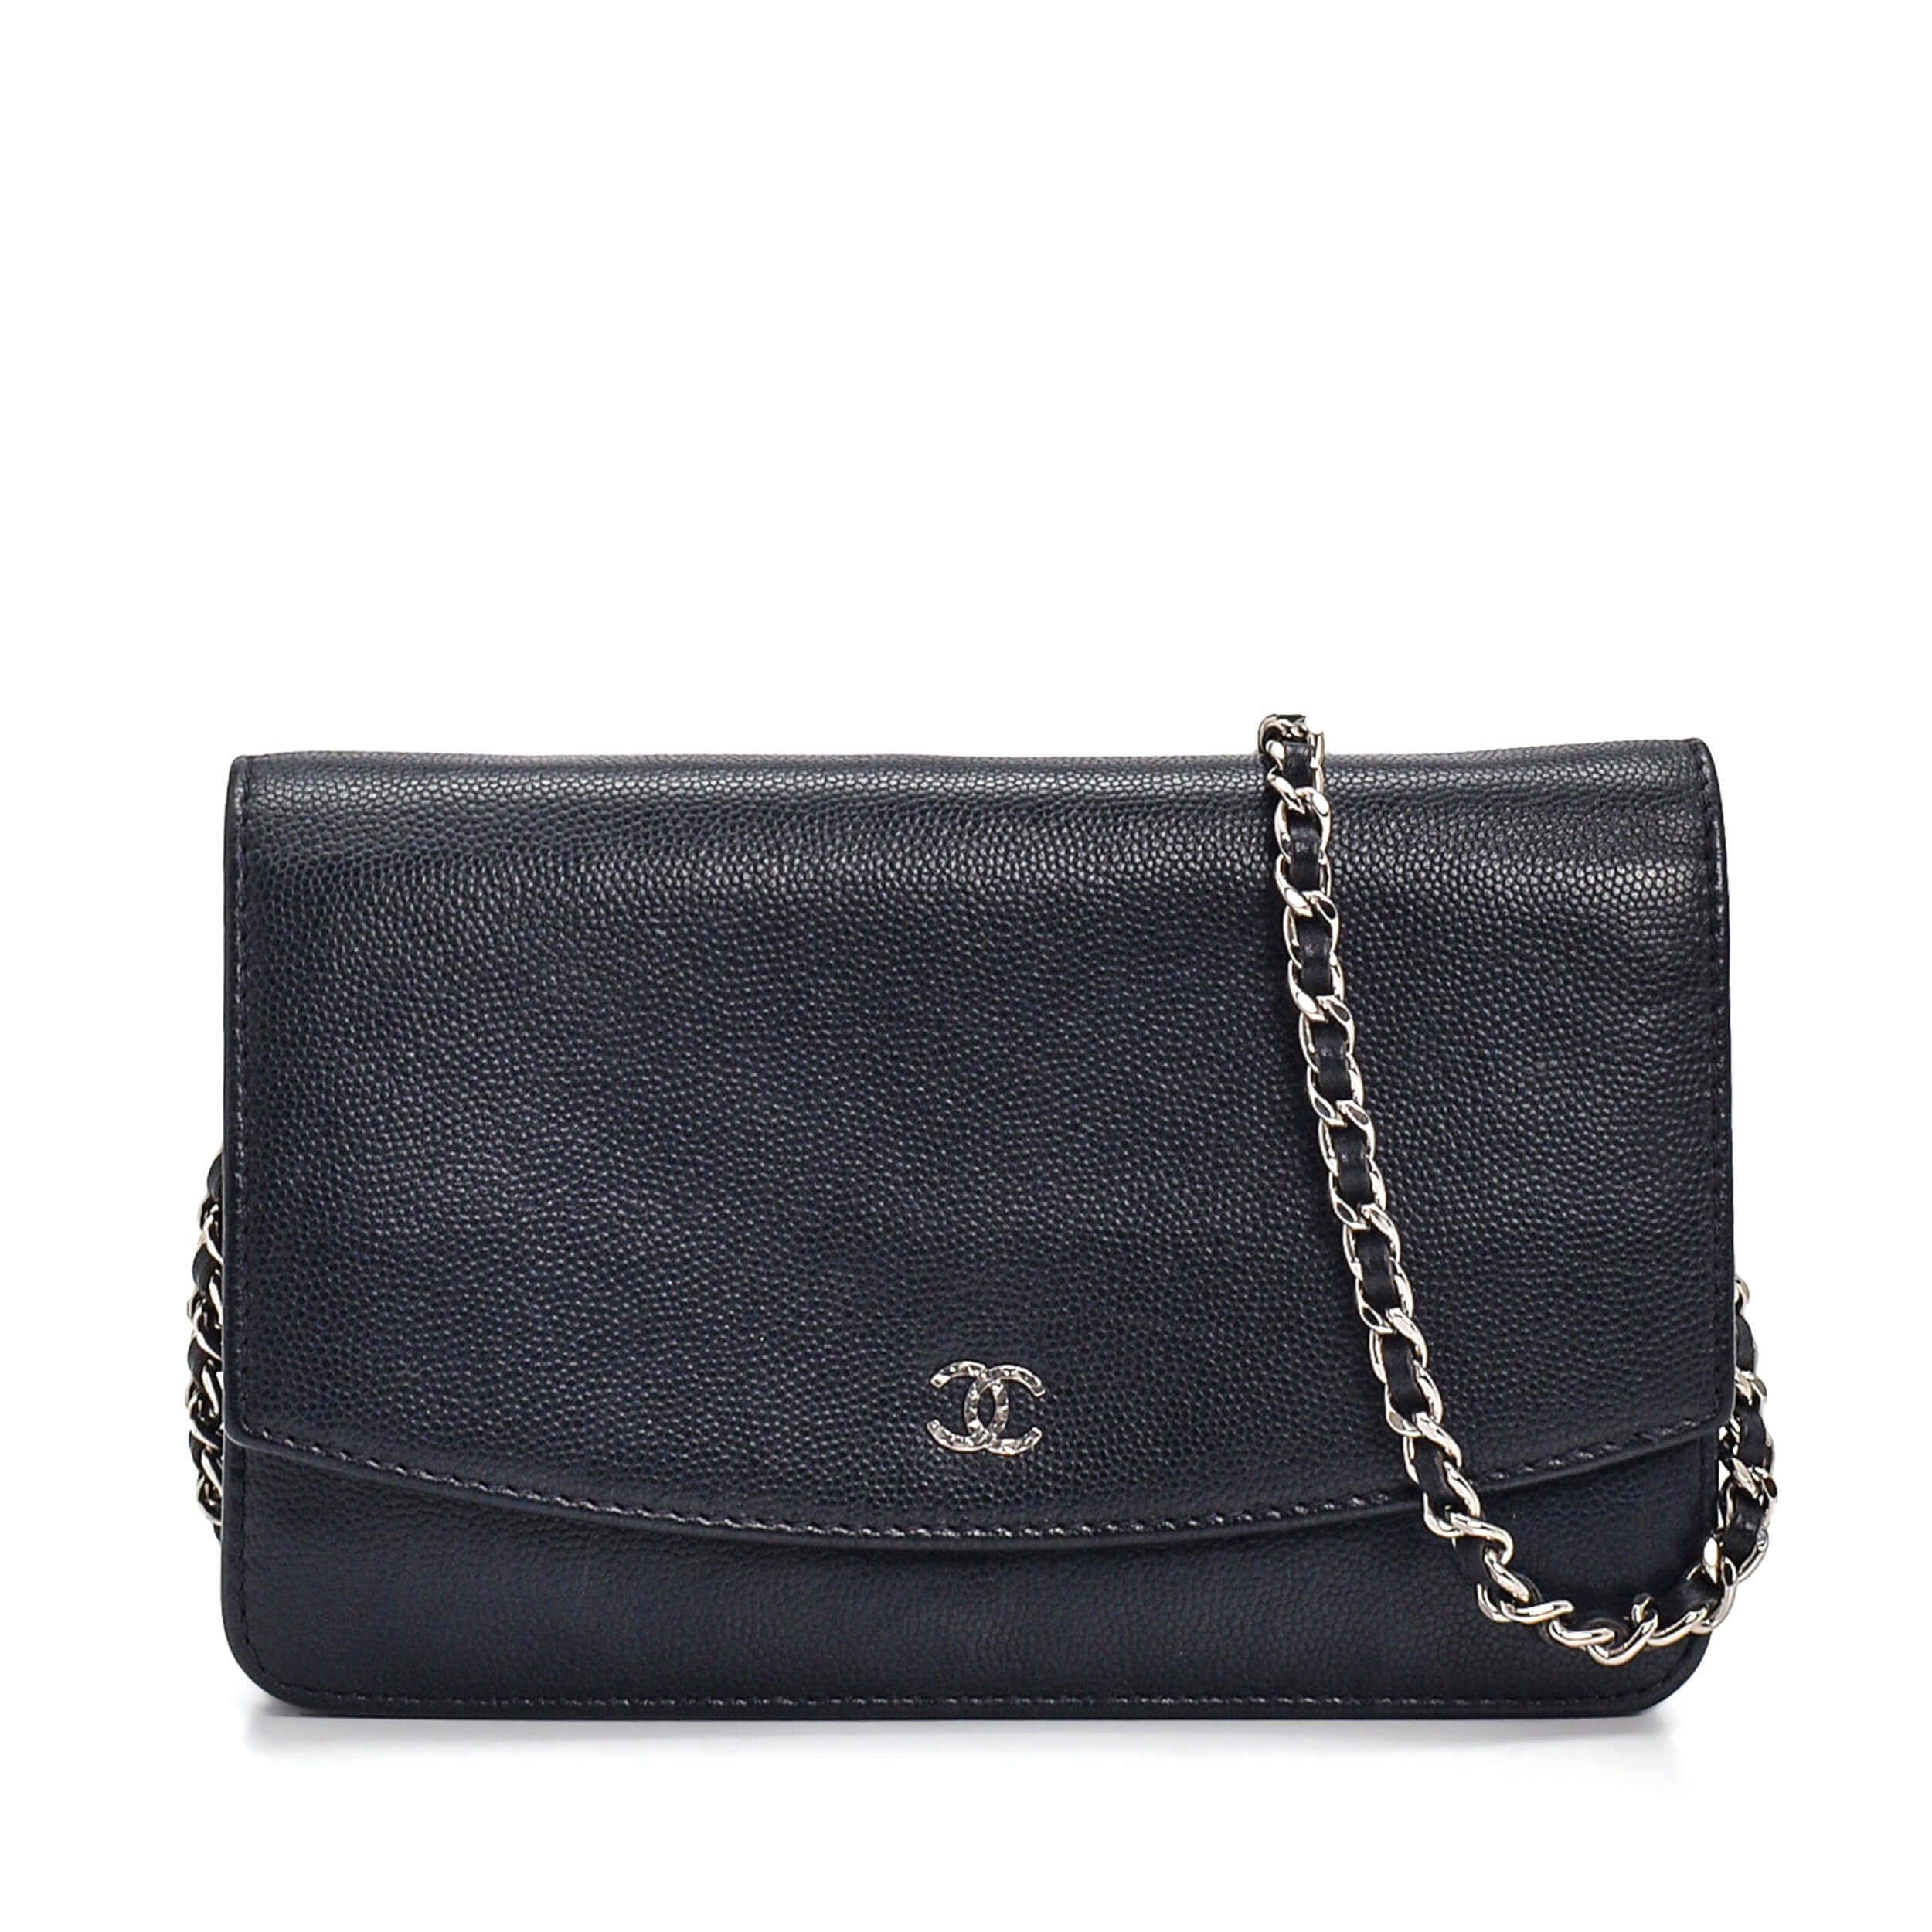 Chanel - Black Caviar Leather Wallet on Chain II